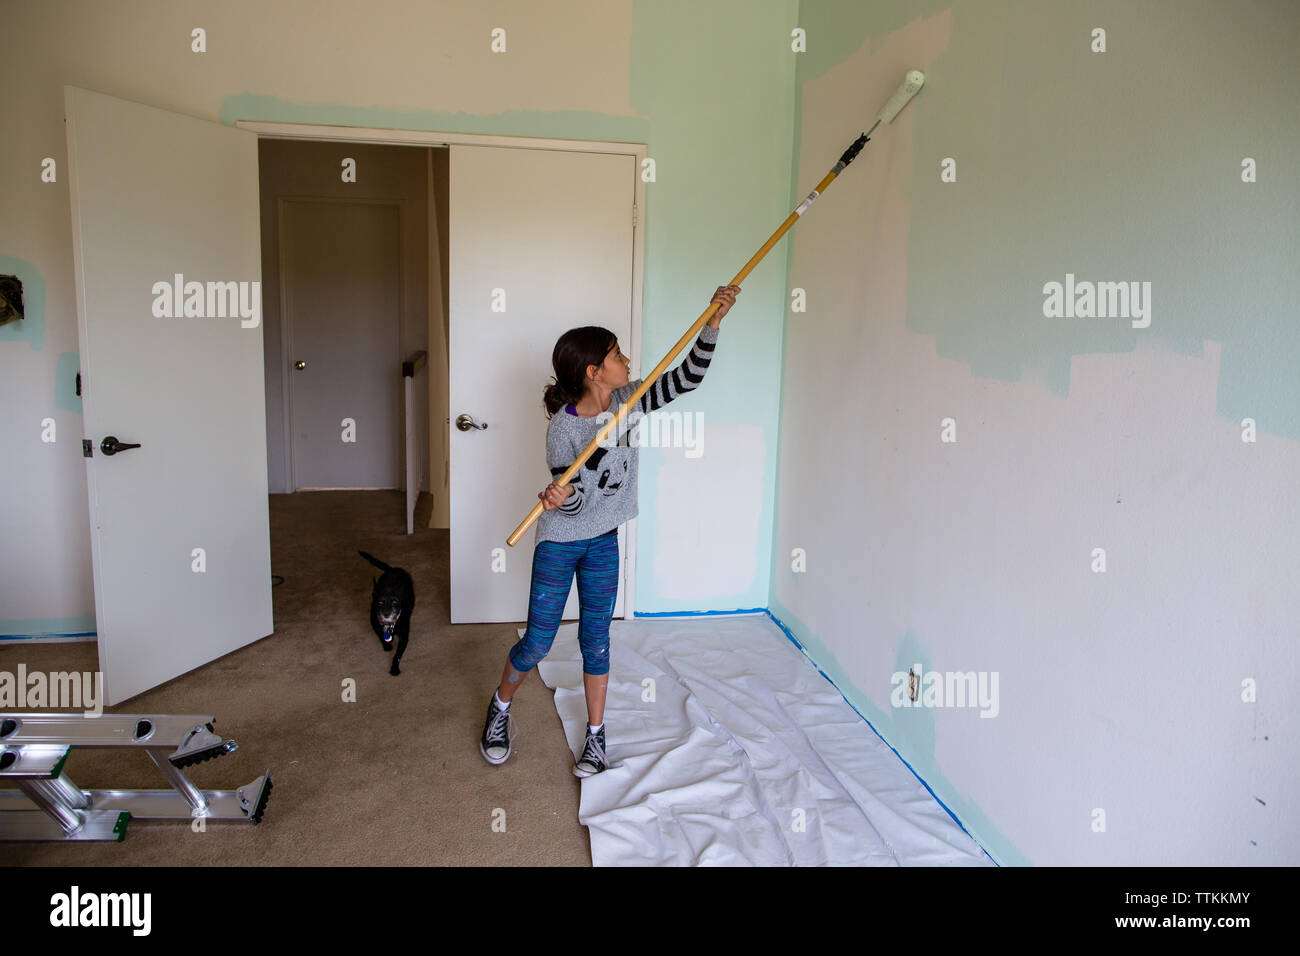 Girl painting wall using paint roller at home Stock Photo